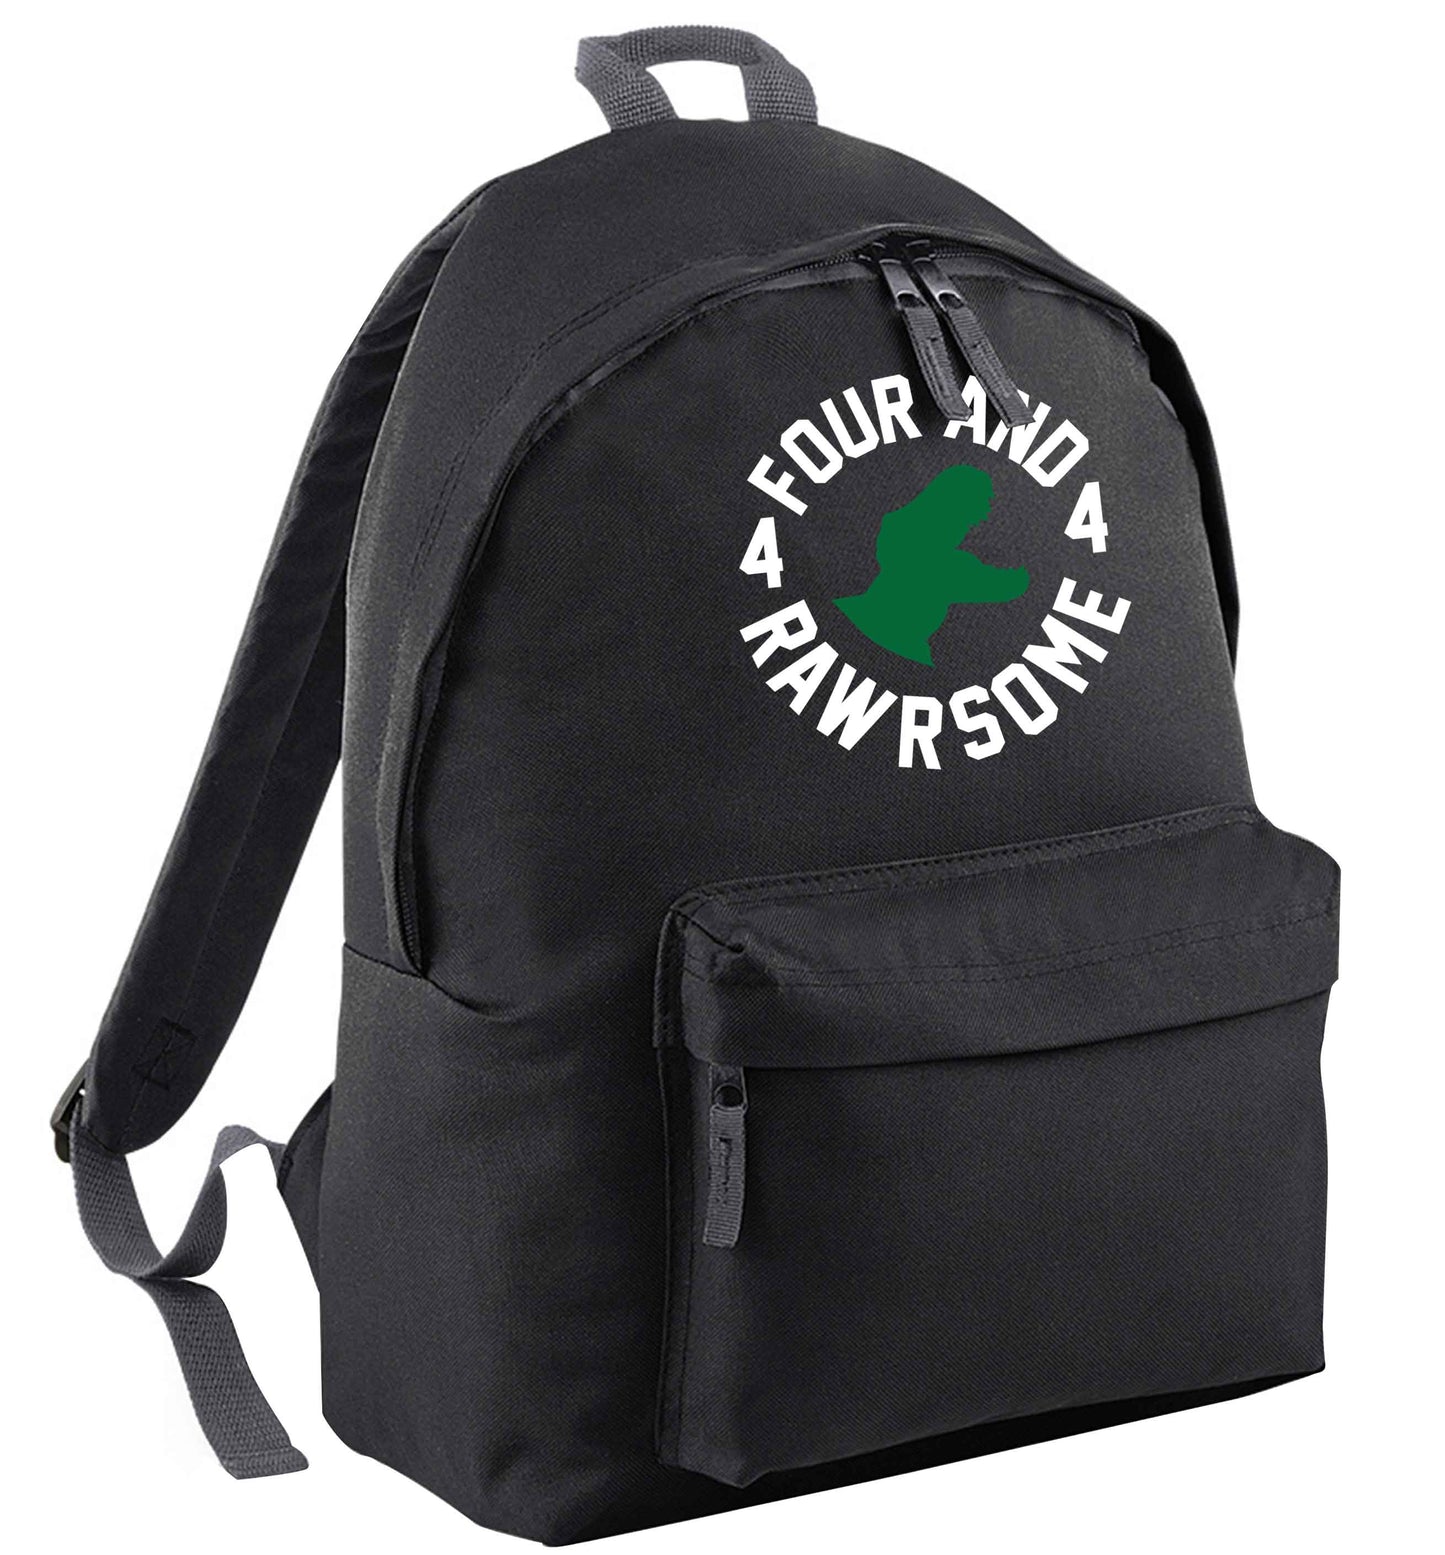 Four and rawrsome | Adults backpack